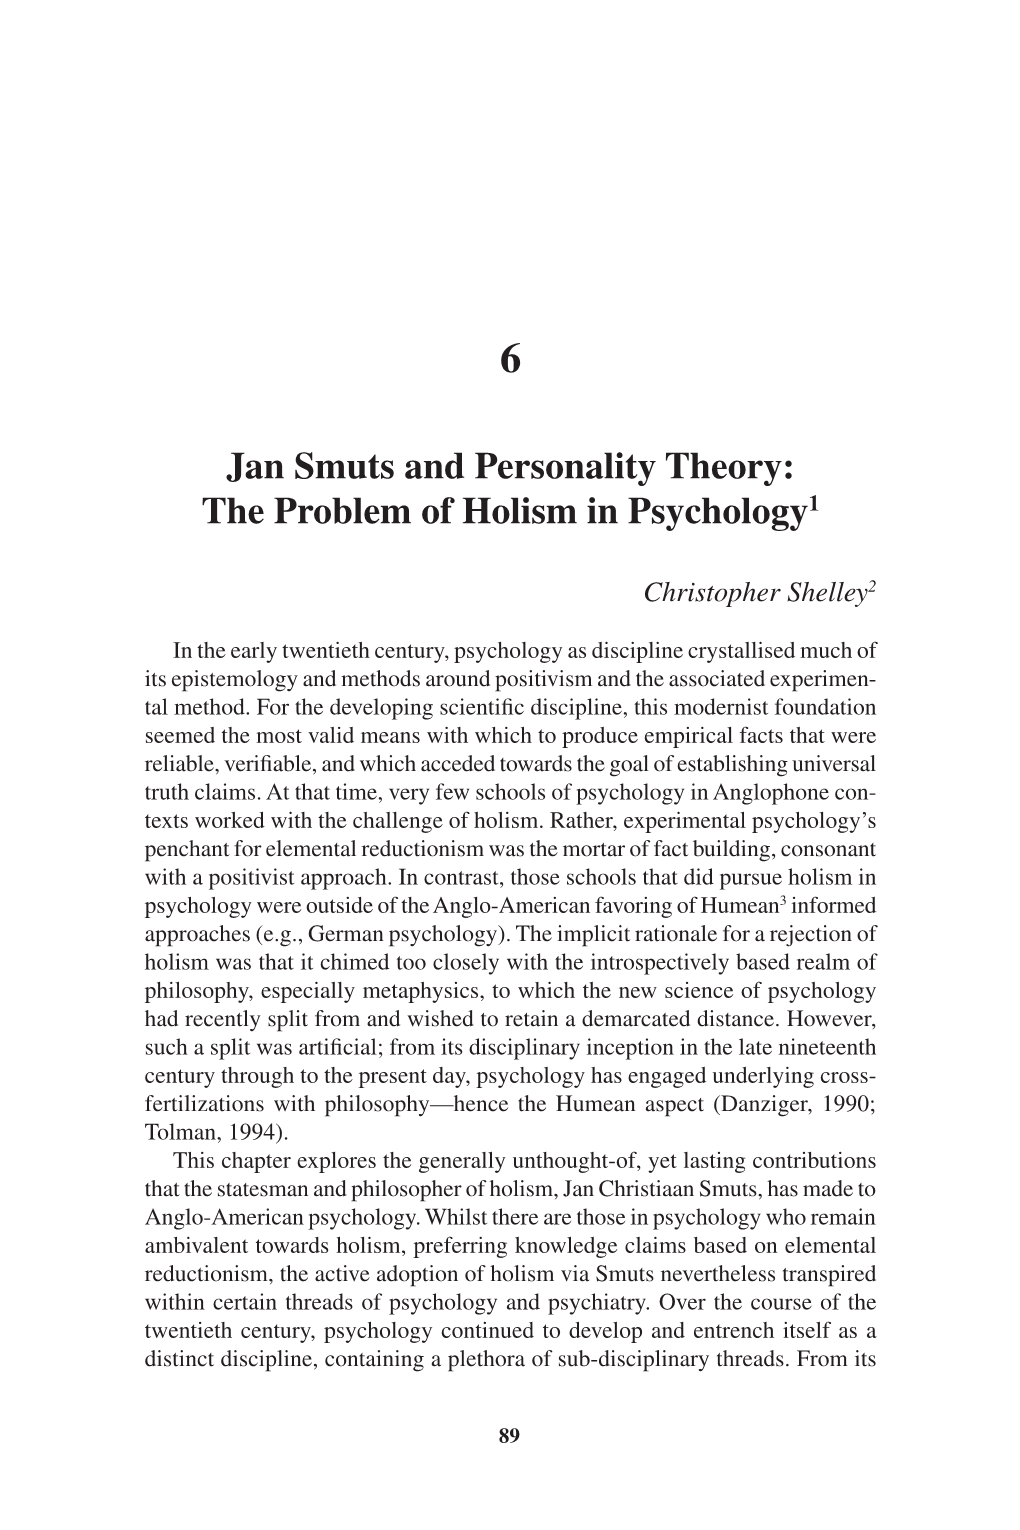 Jan Smuts and Personality Theory: the Problem of Holism in Psychology1